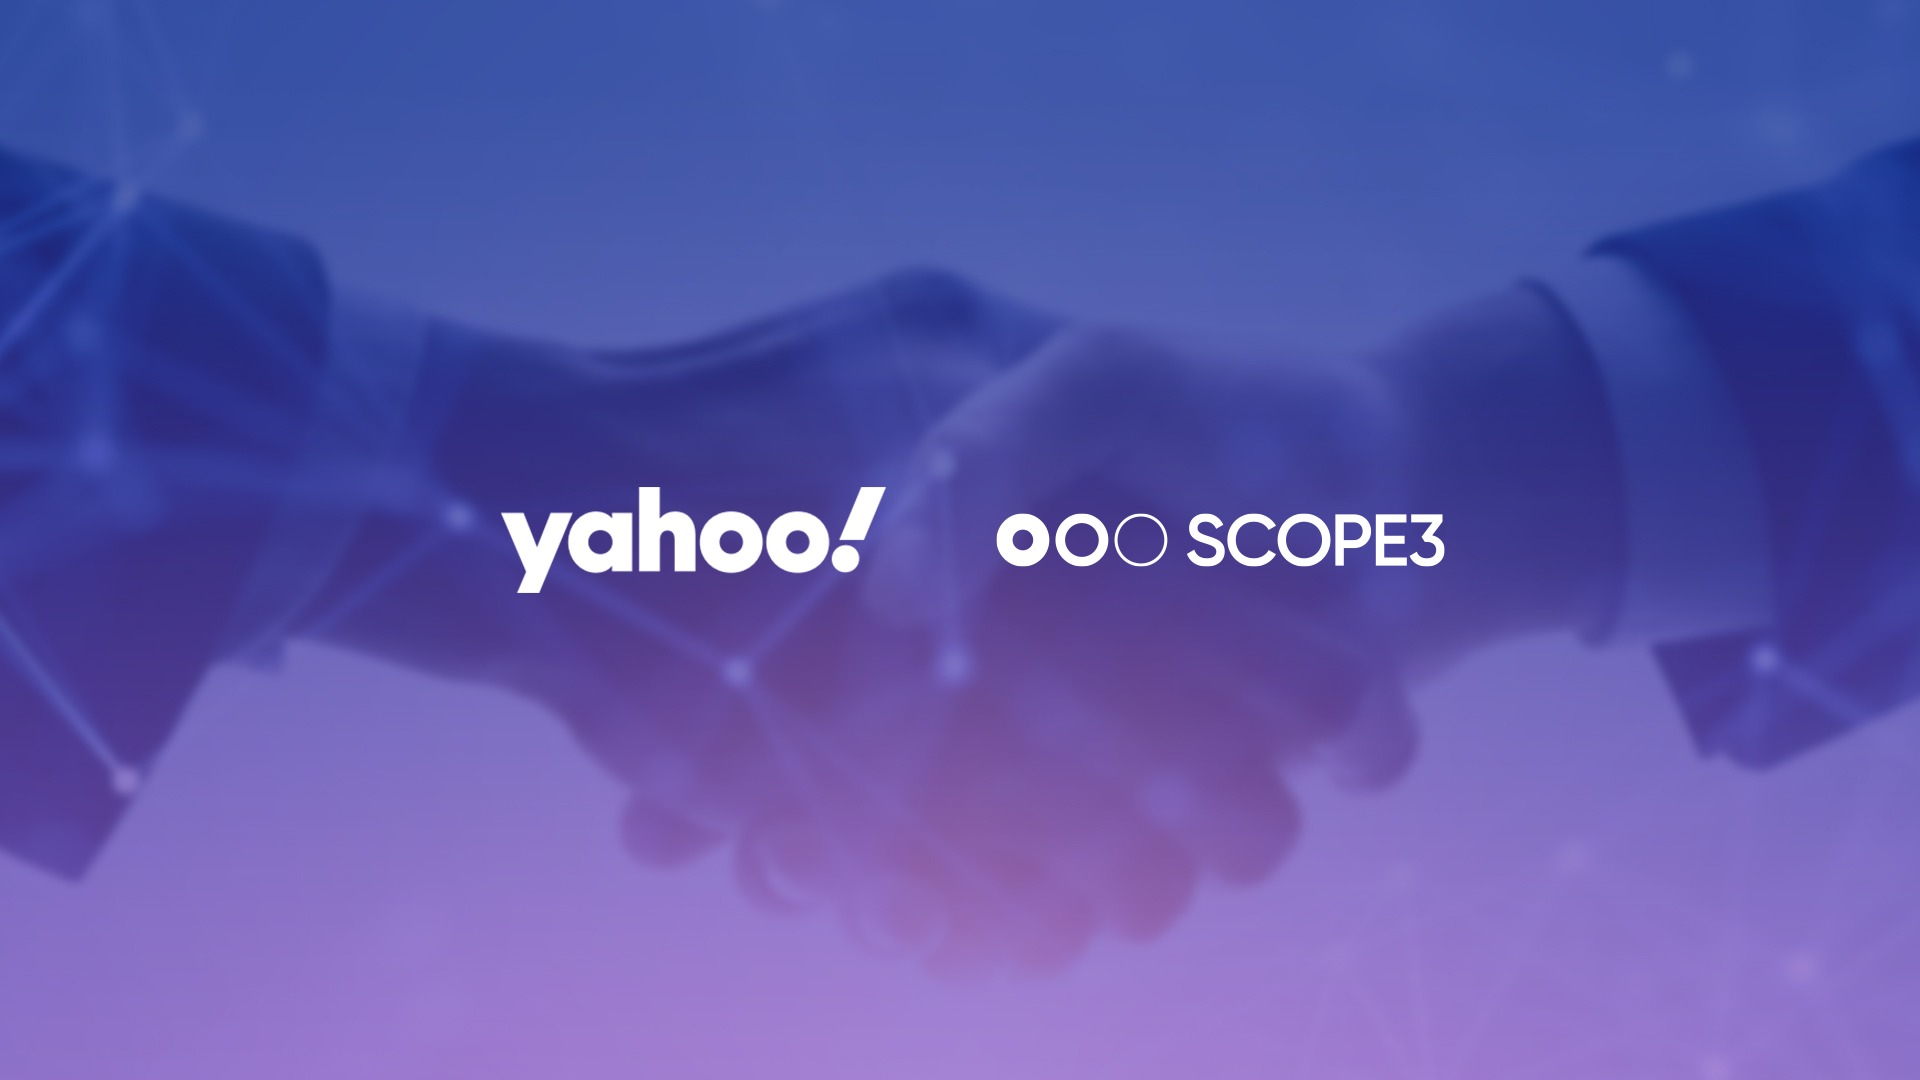 Sustainable Advertising: Scope3 and Yahoo announce integration